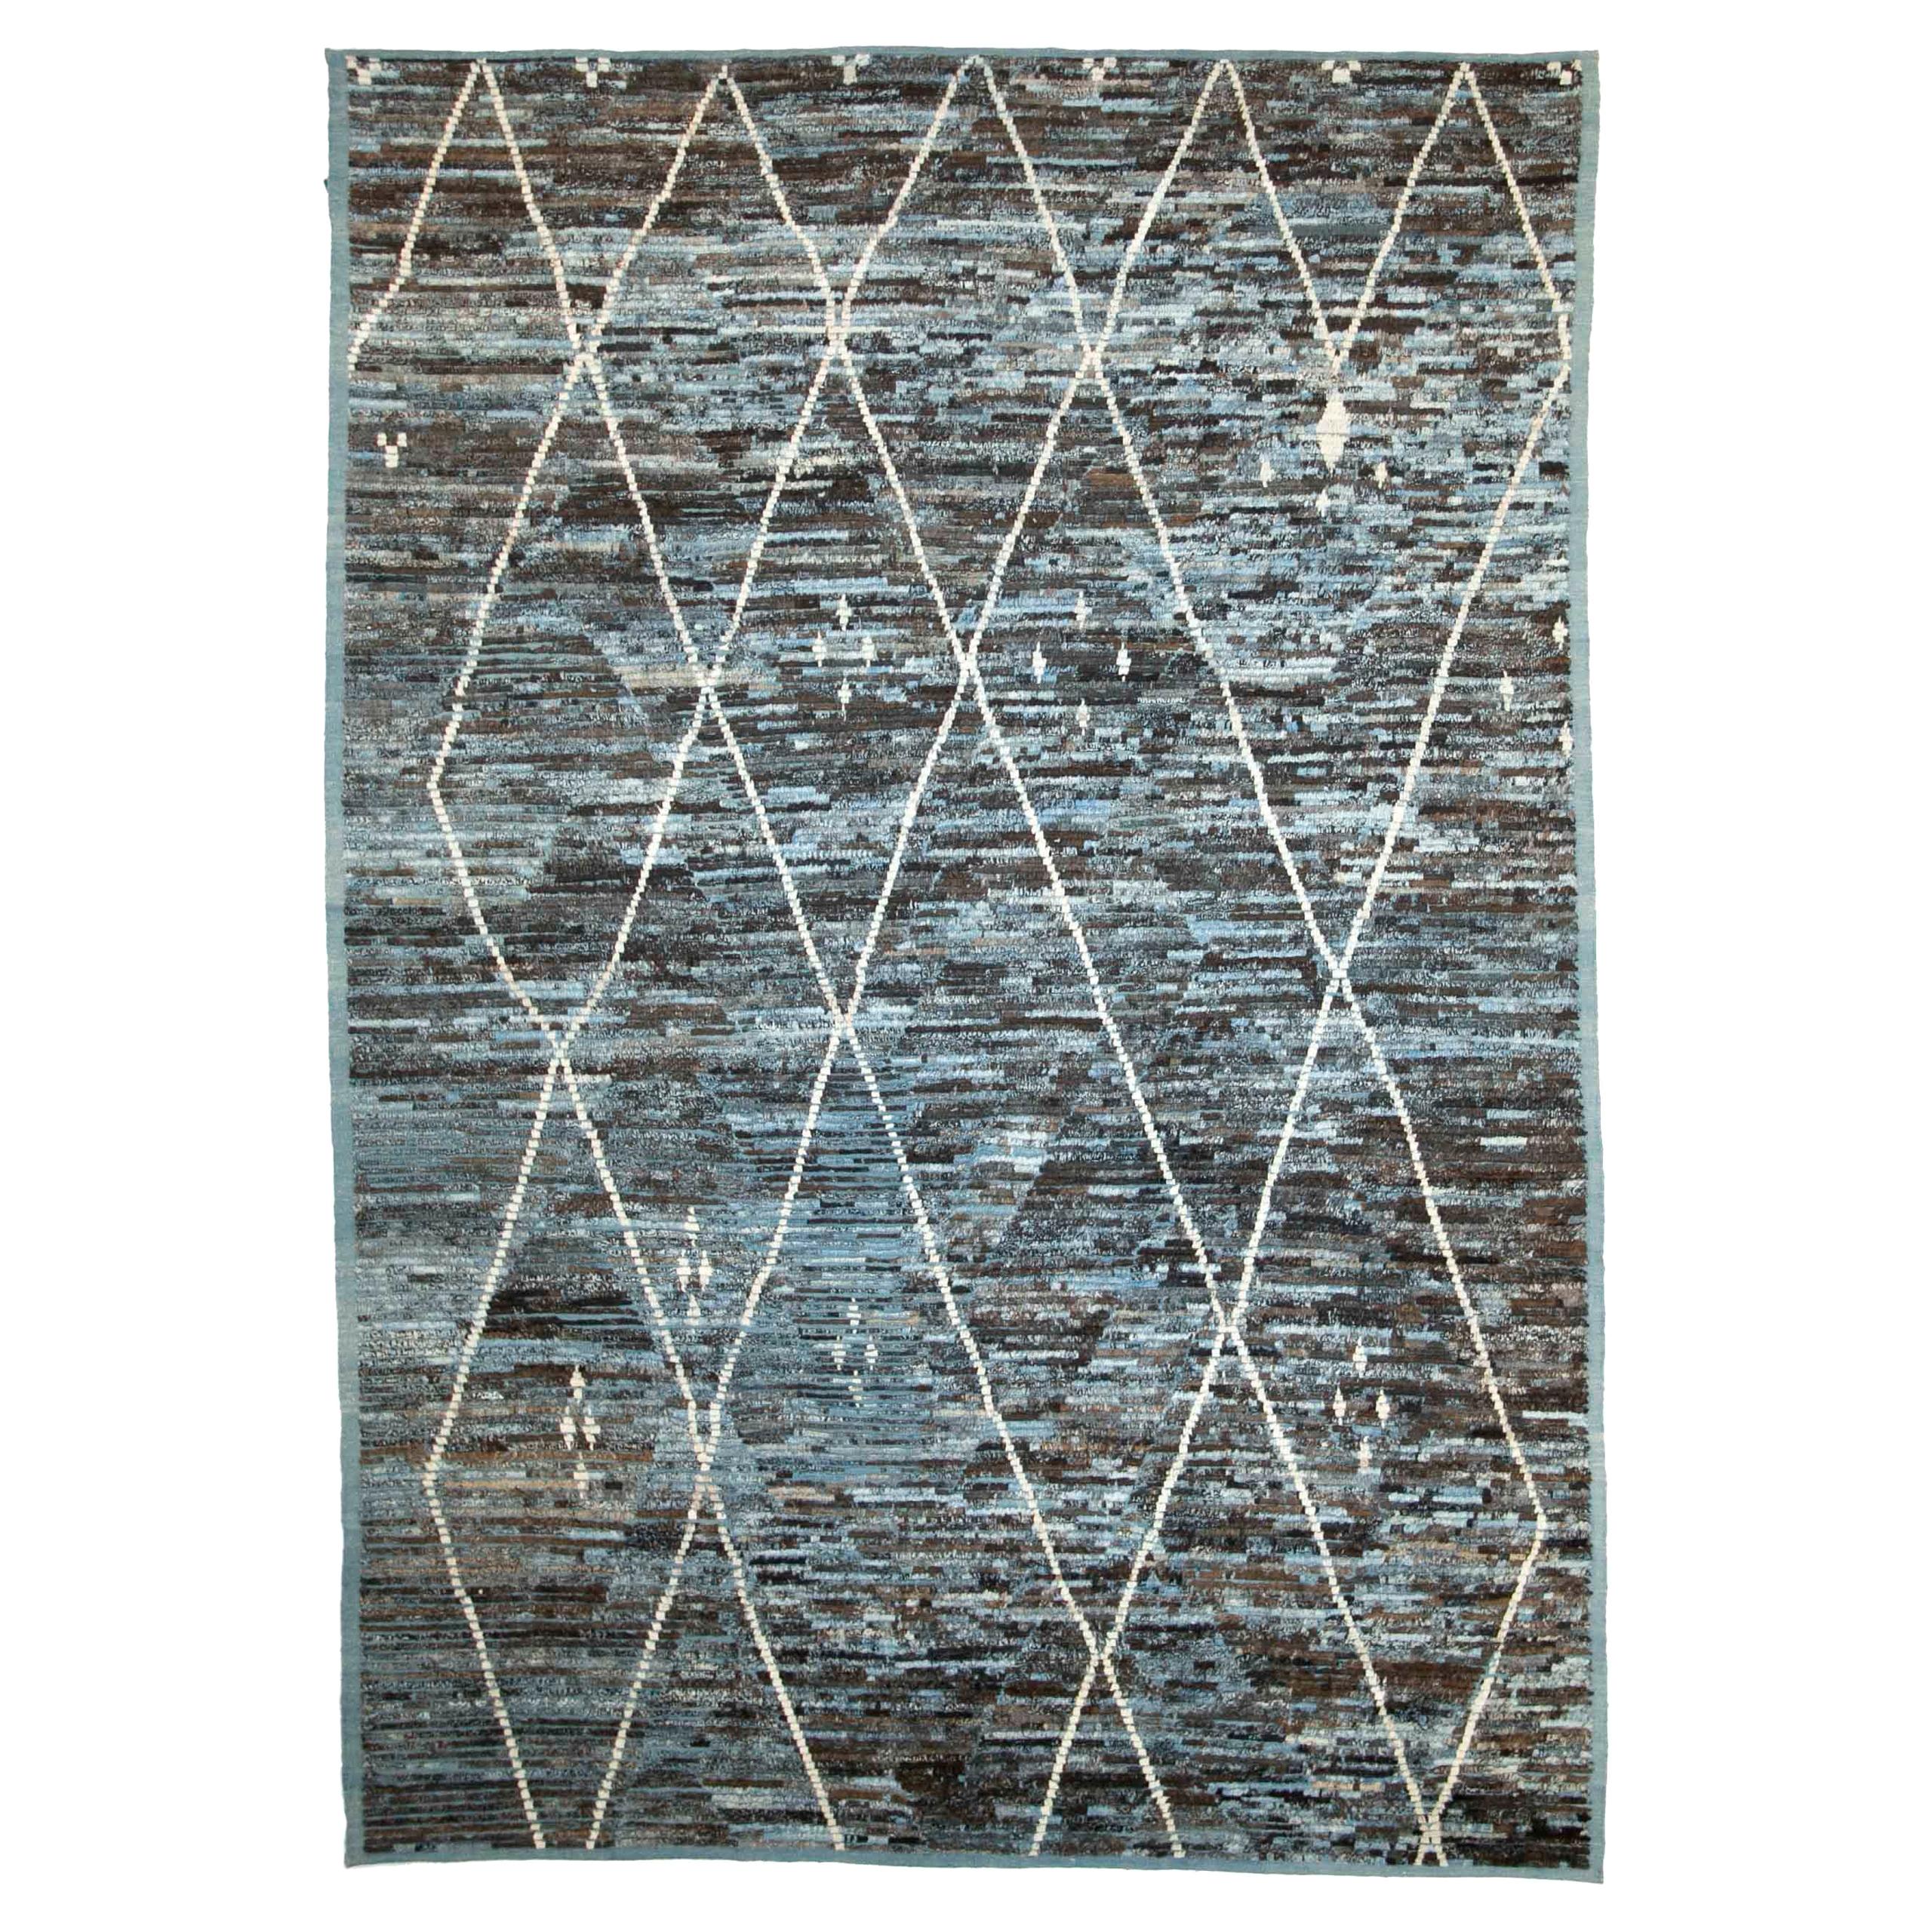 Modern Afghan Moroccan Style Rug with White Lines over Brown and Blue Field